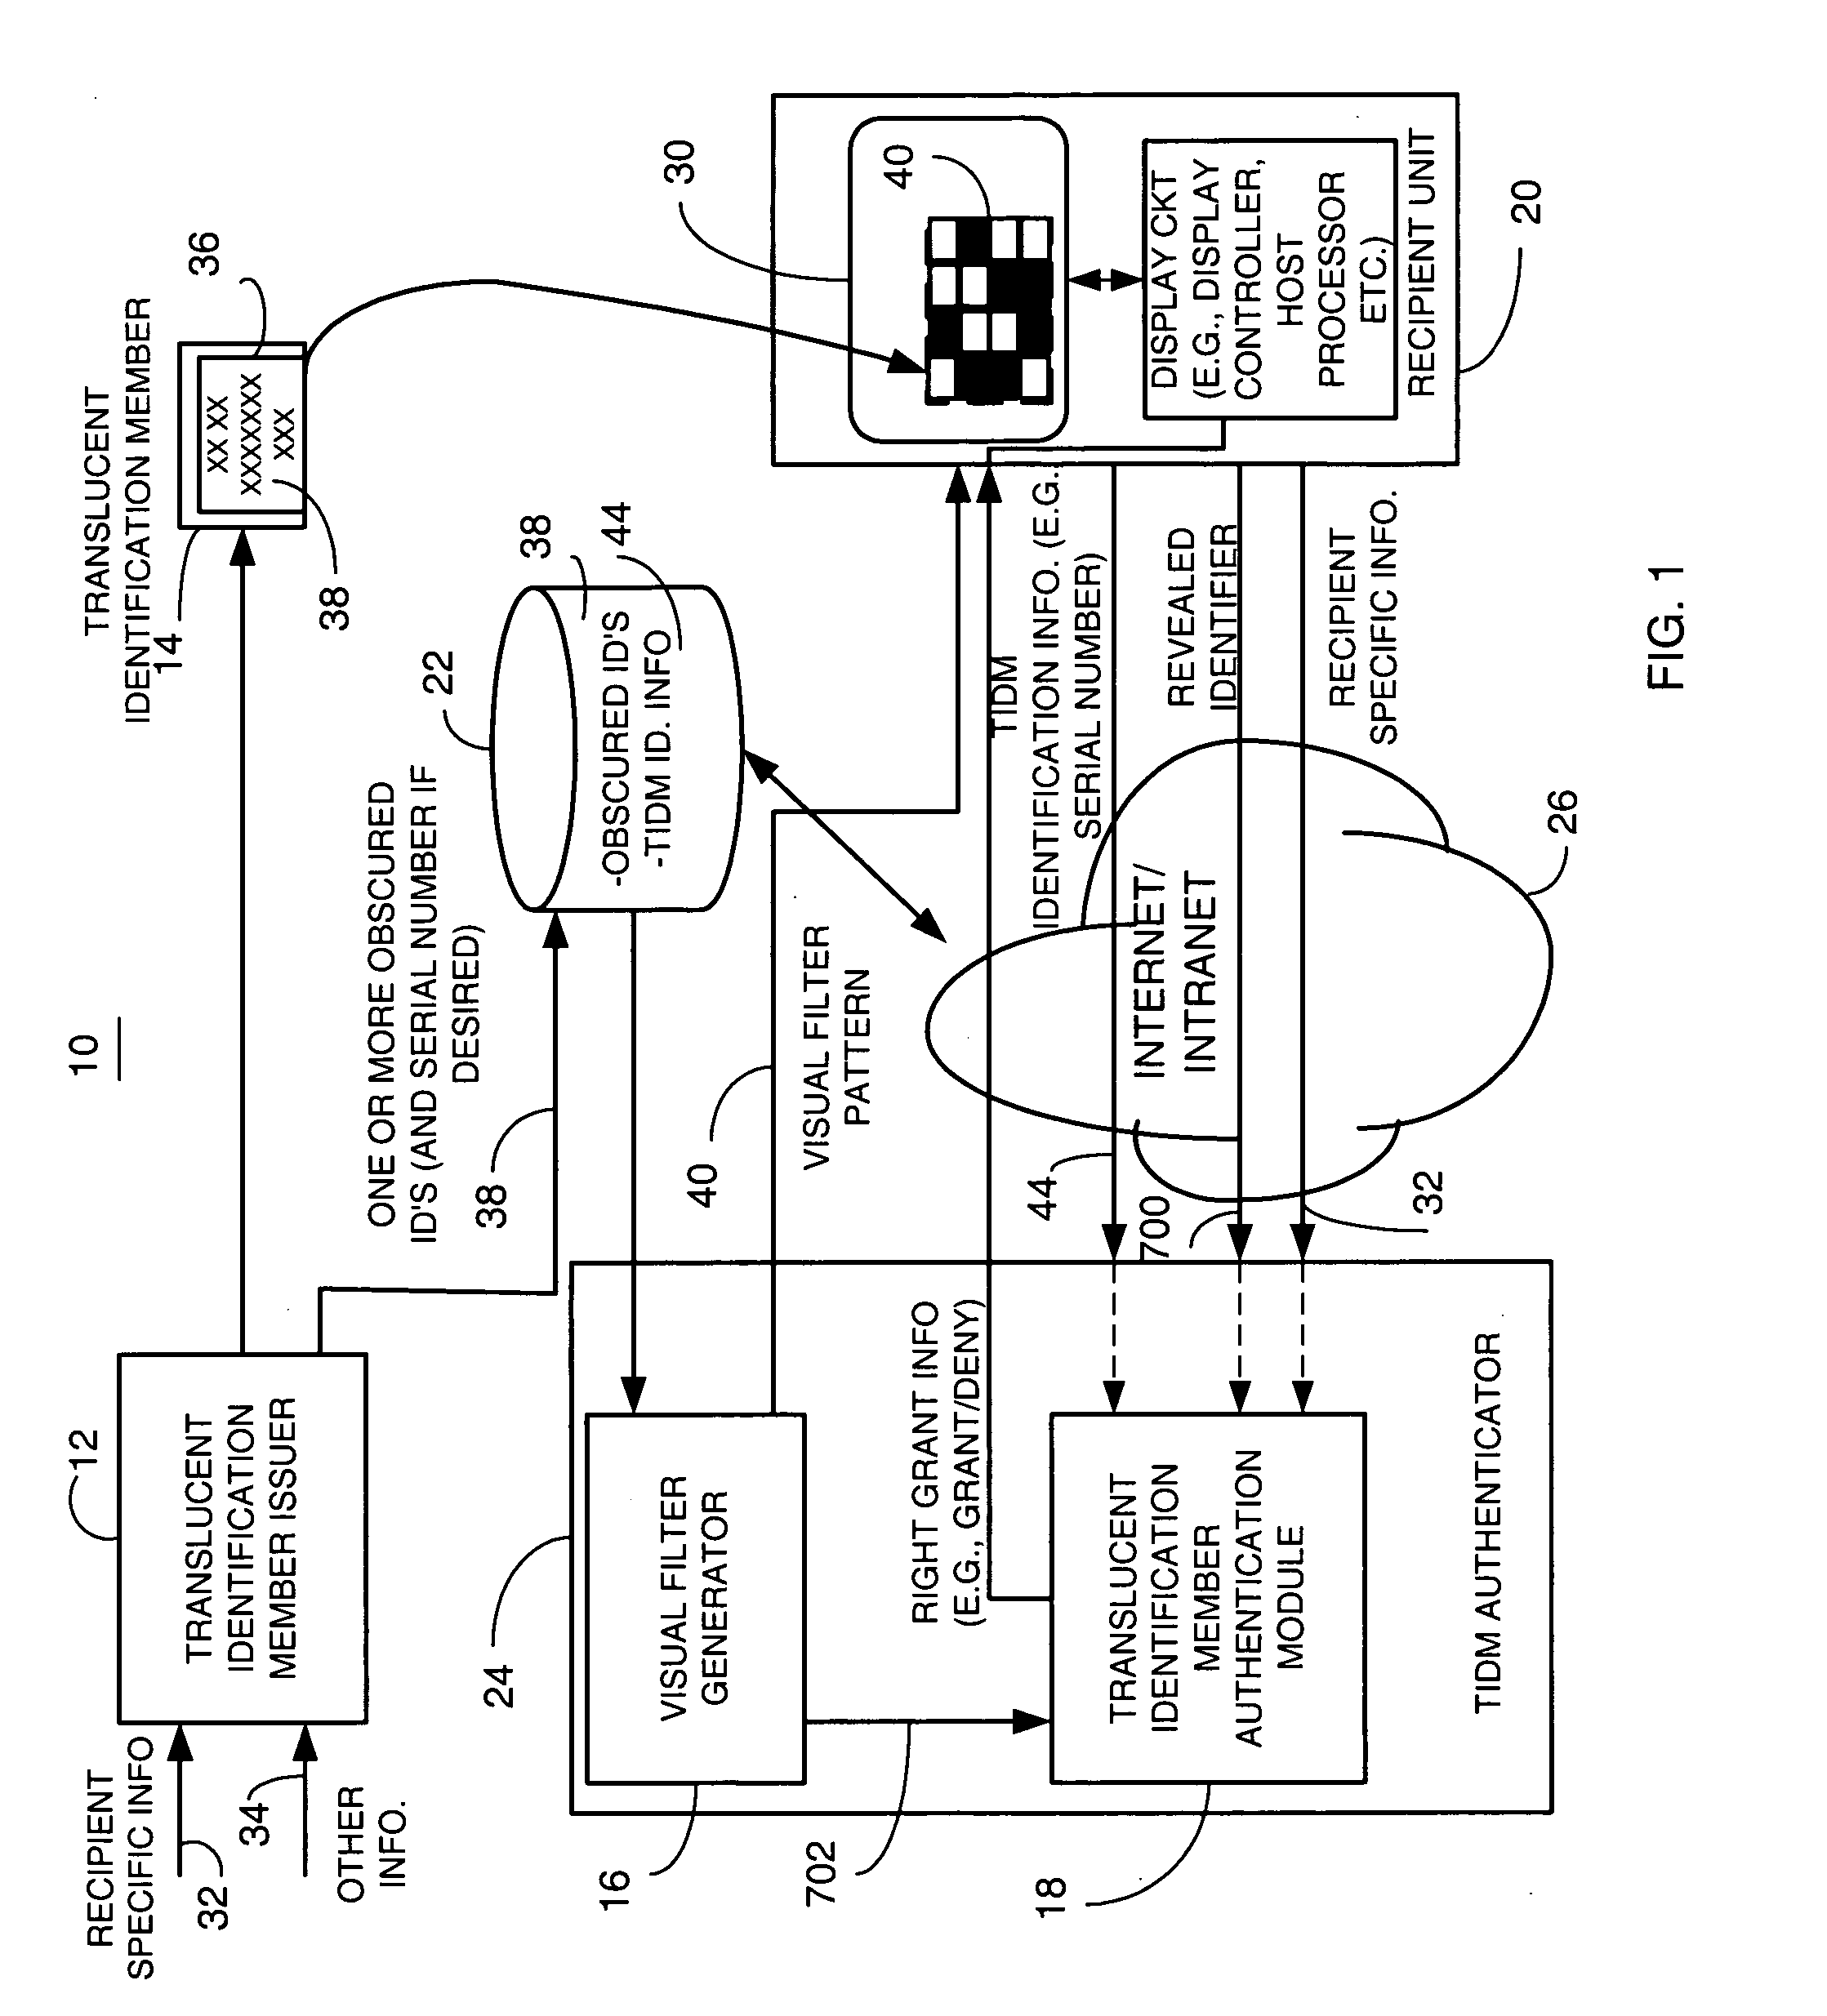 Method and apparatus for providing authentication using policy-controlled authentication articles and techniques